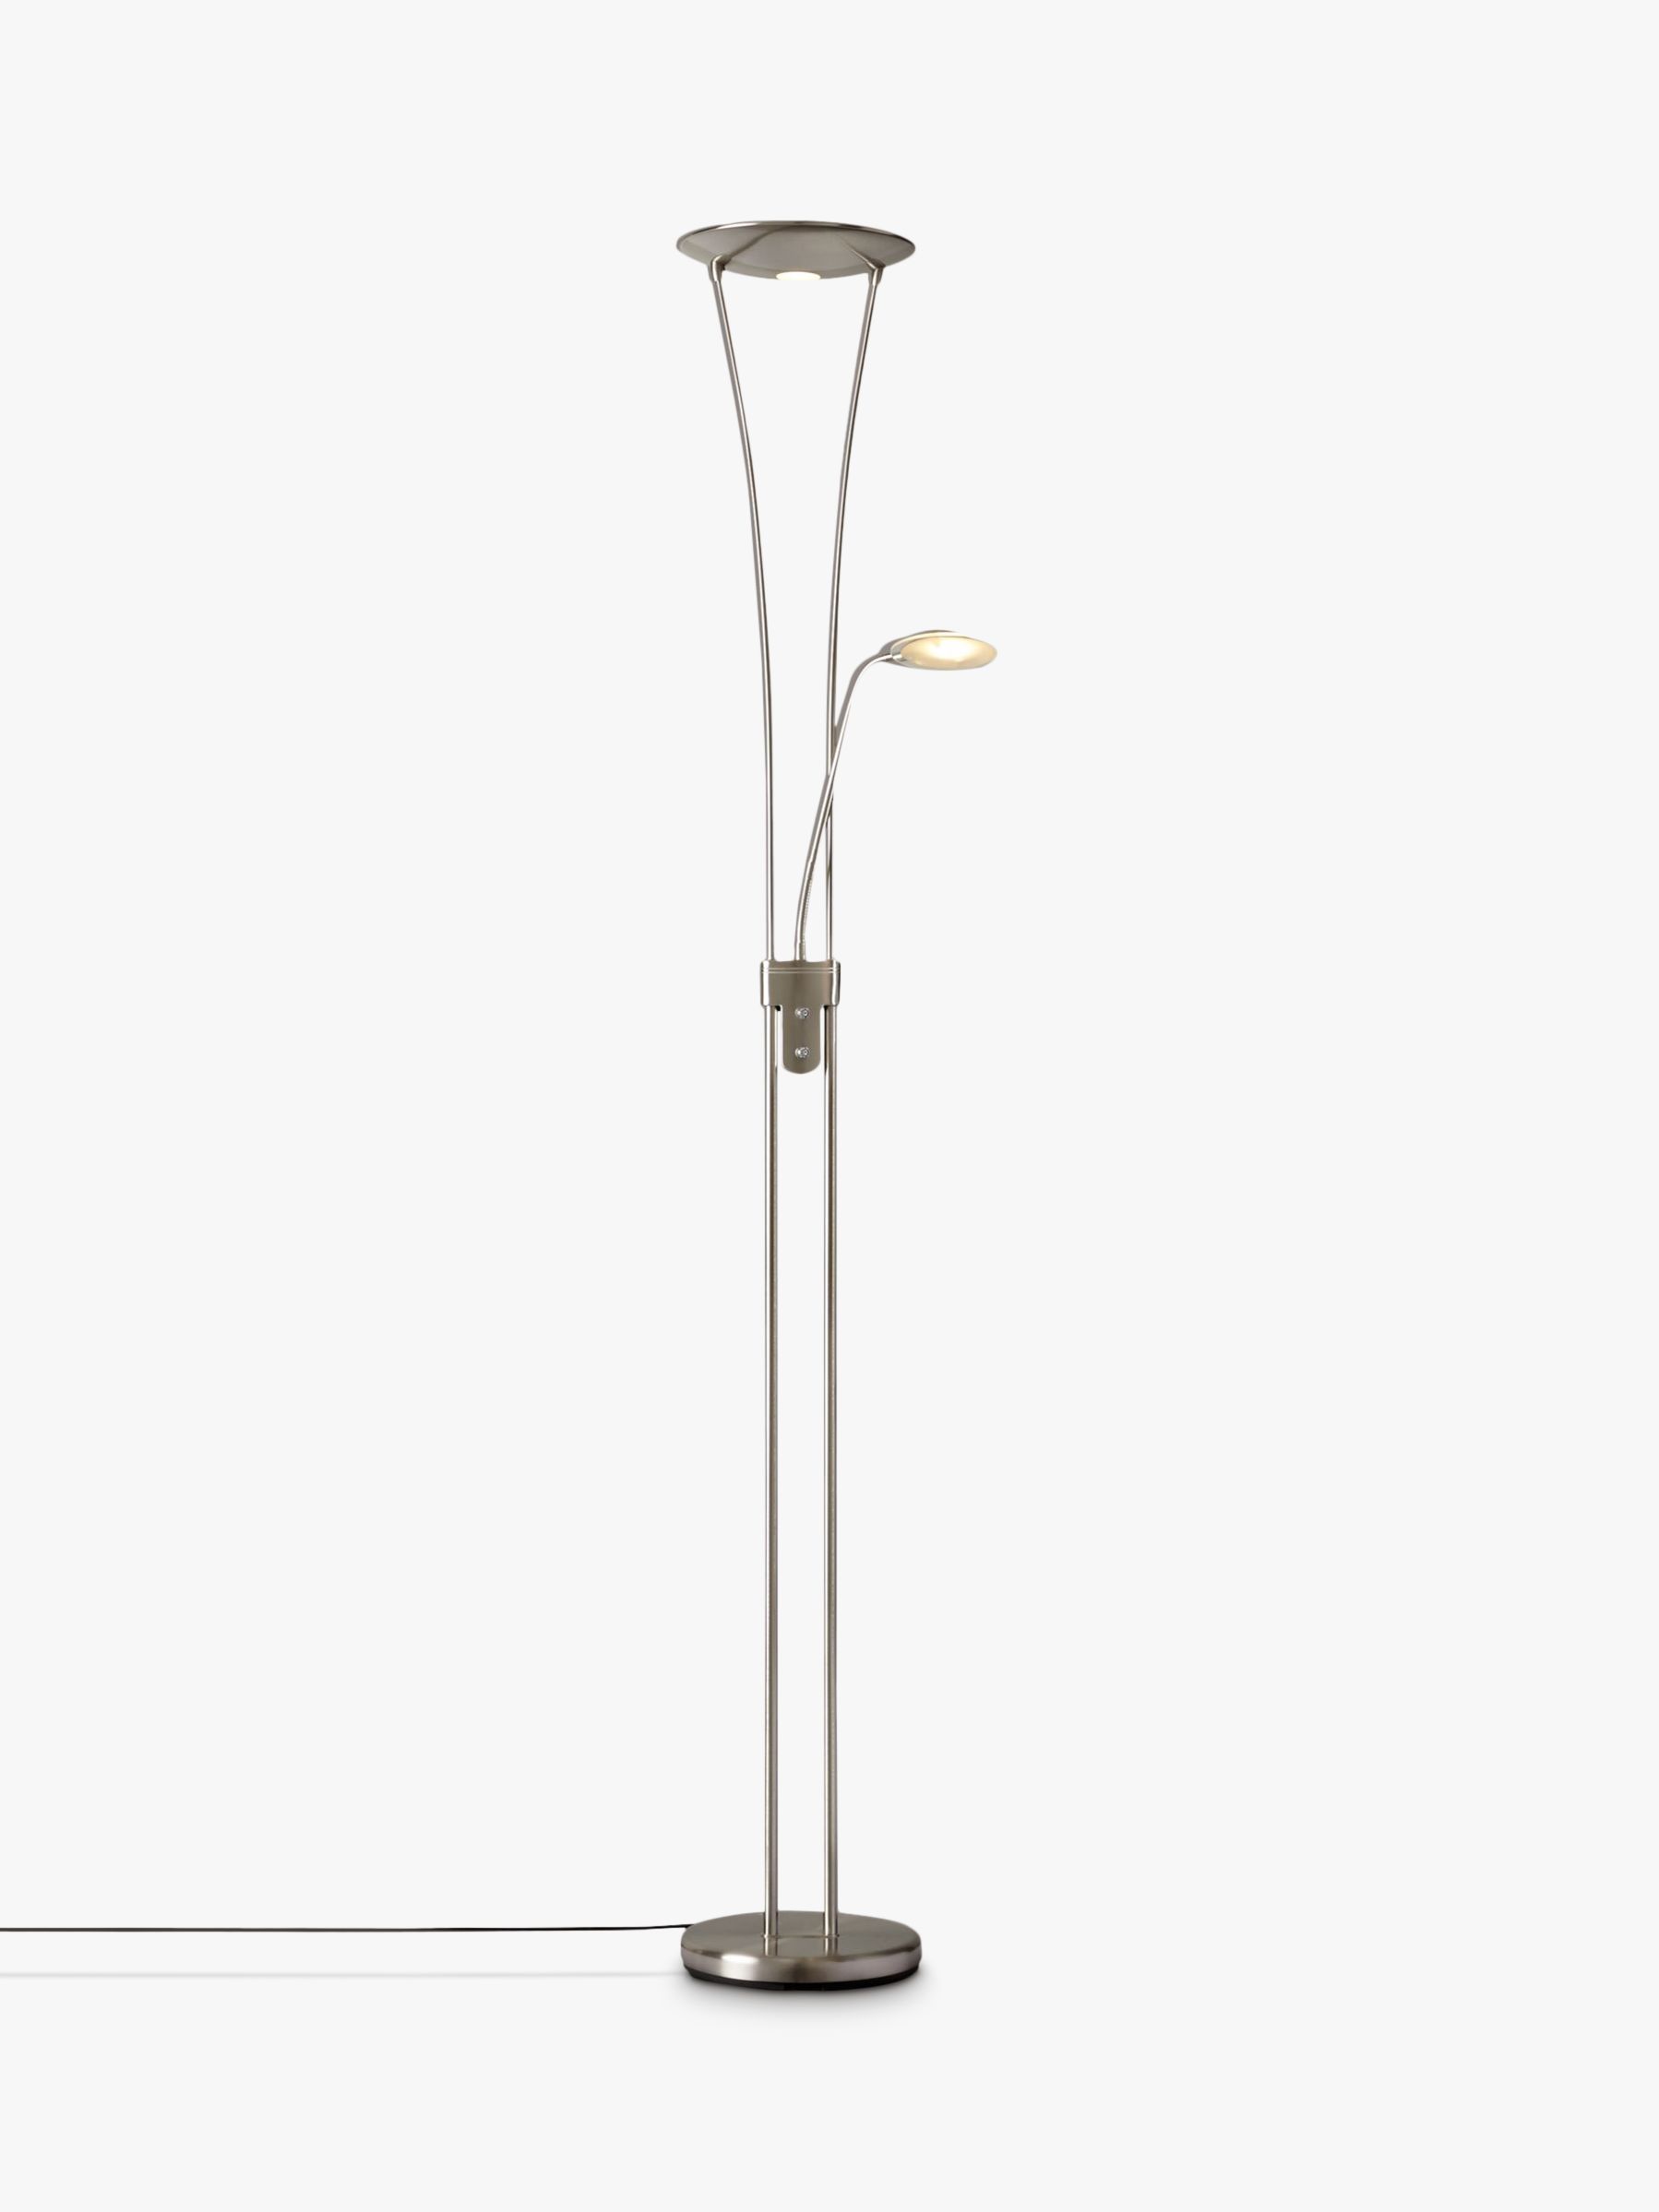 Dimmable Floor Lamps John Lewis, Uplight Floor Lamp With Dimmer